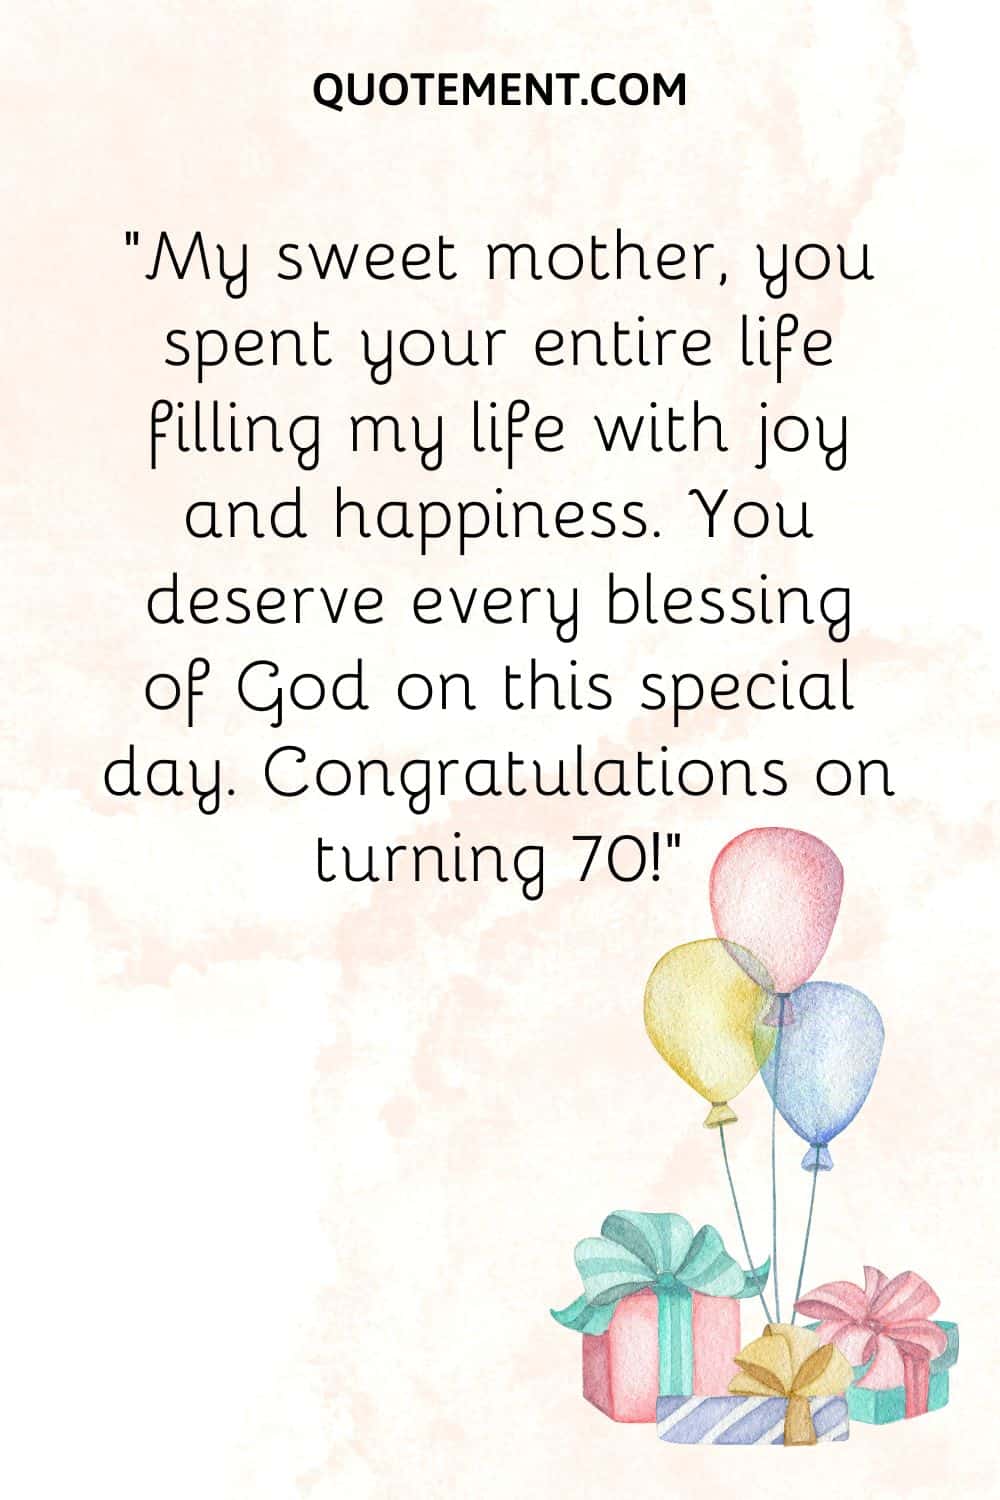 “My sweet mother, you spent your entire life filling my life with joy and happiness. You deserve every blessing of God on this special day. Congratulations on turning 70!”